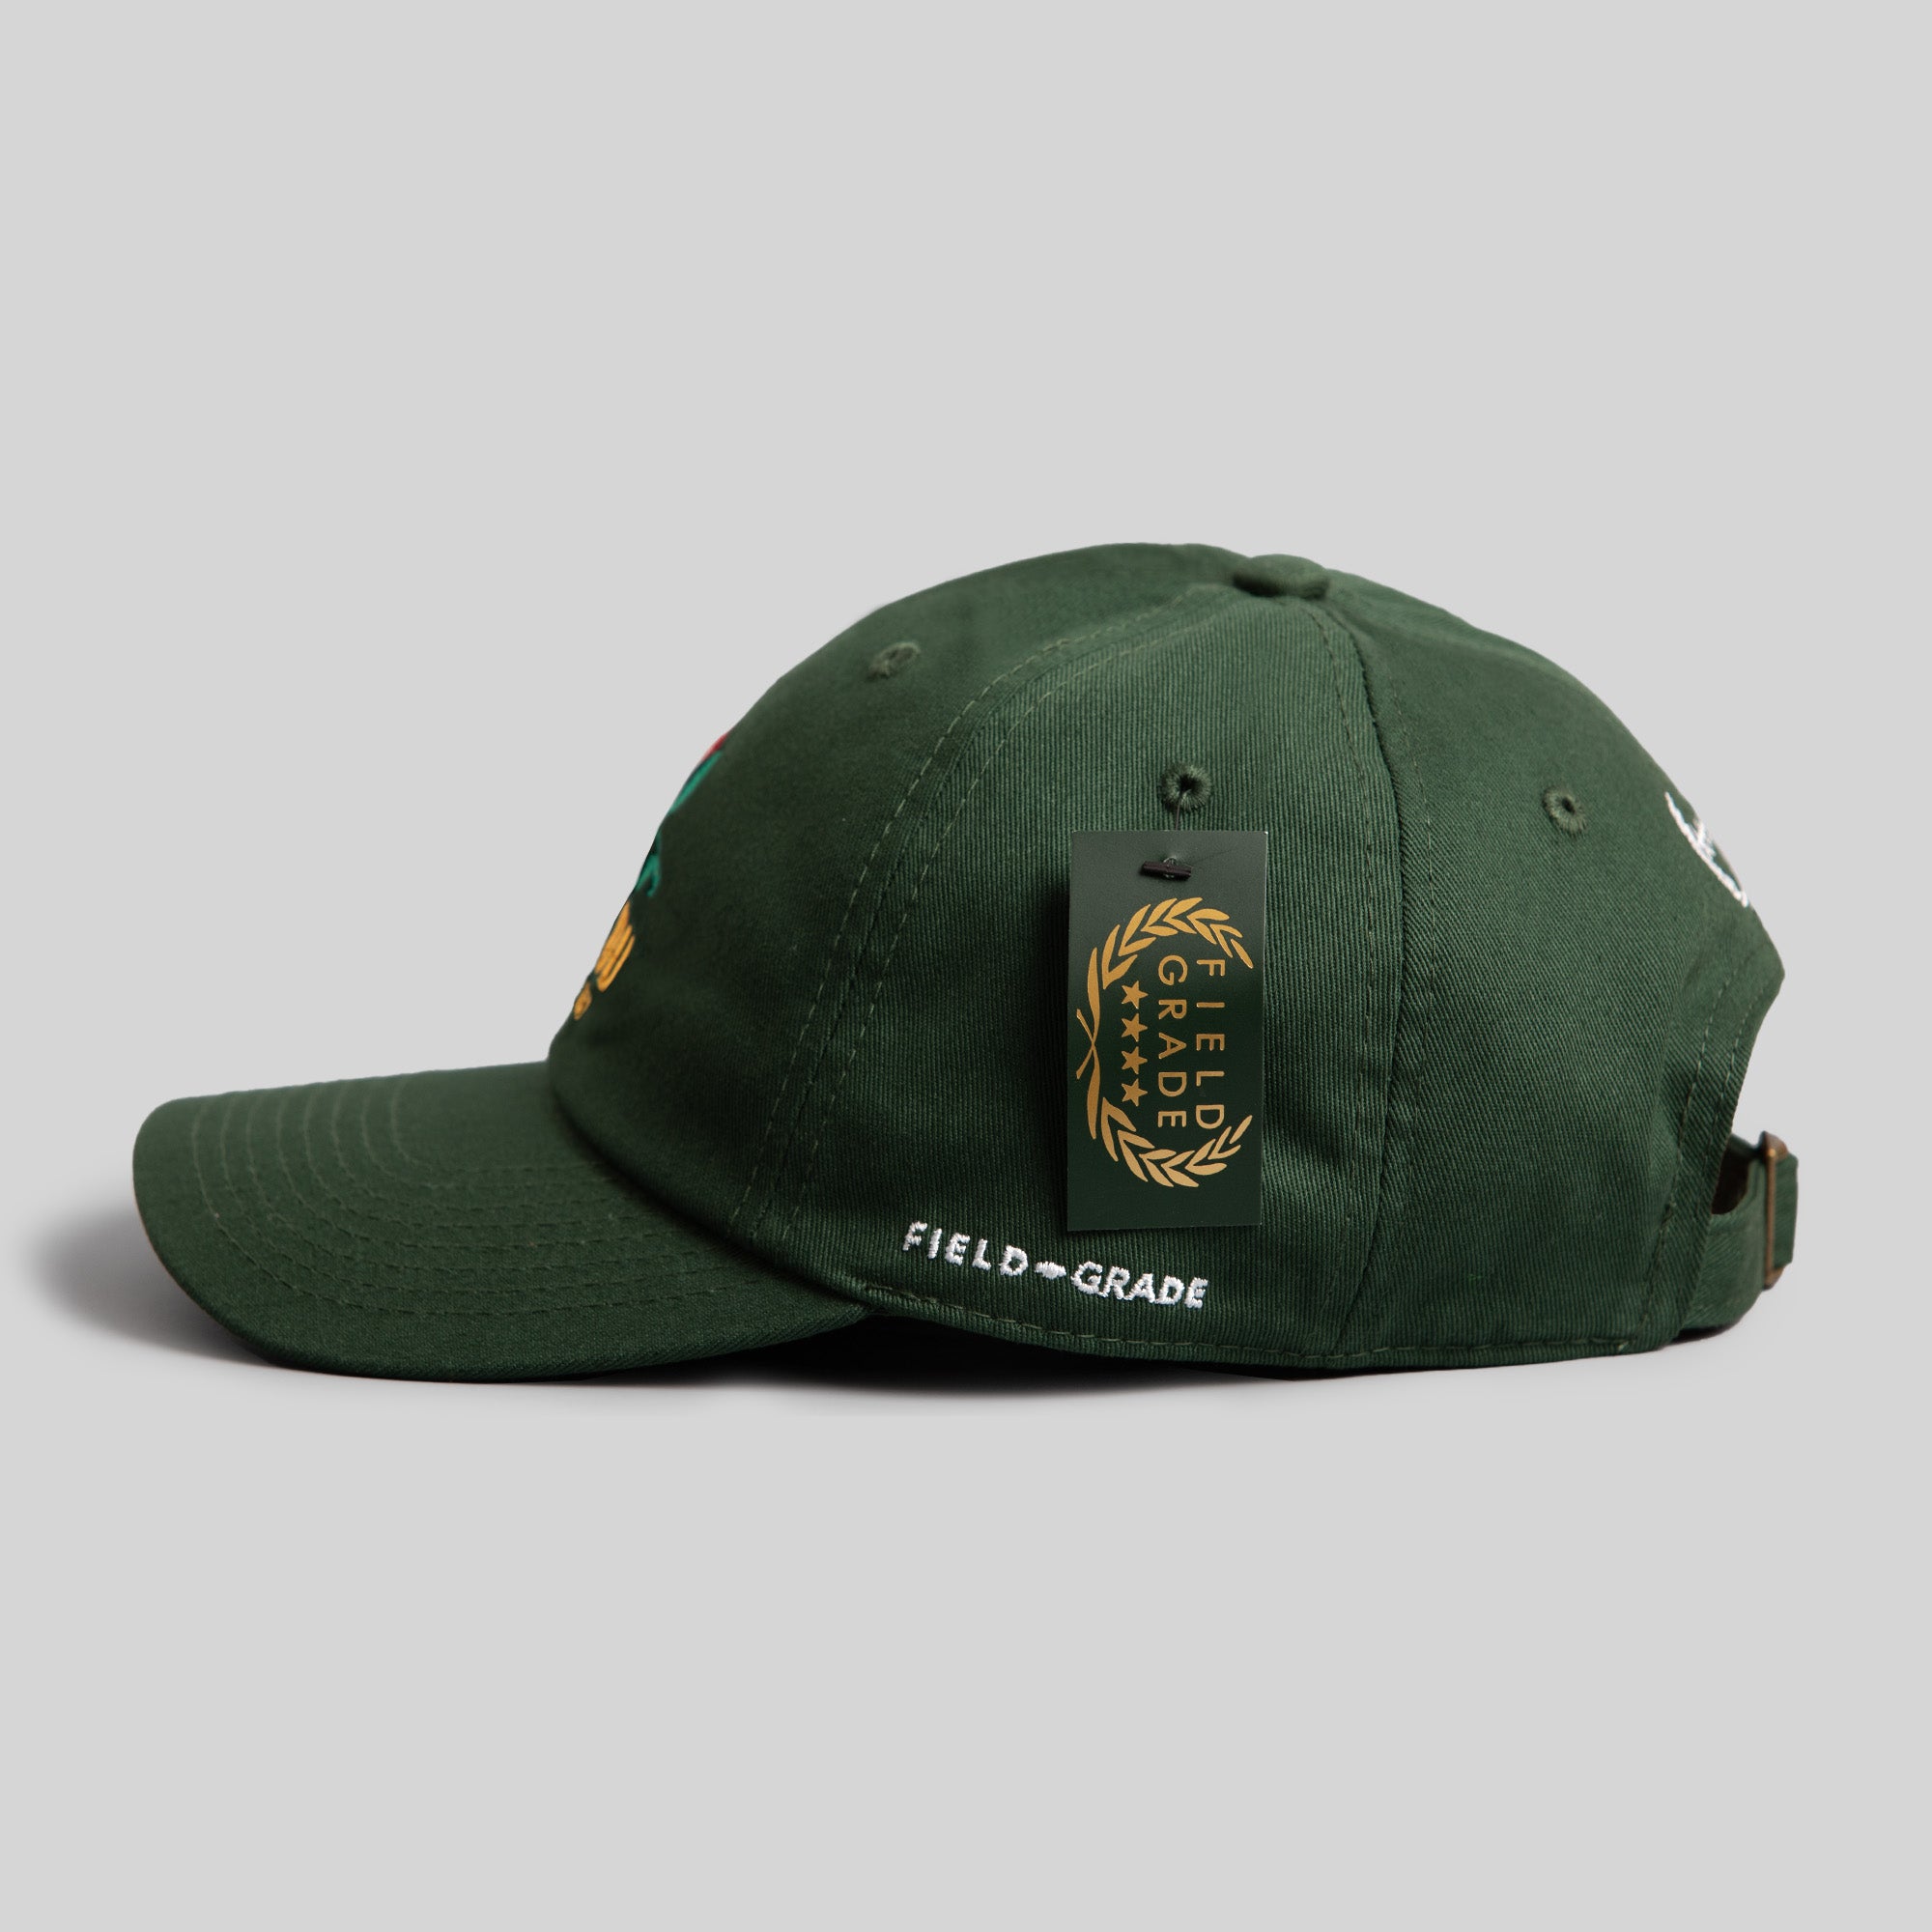 HAVE A NICE DAY FG GREEN RELAXED FIT HAT